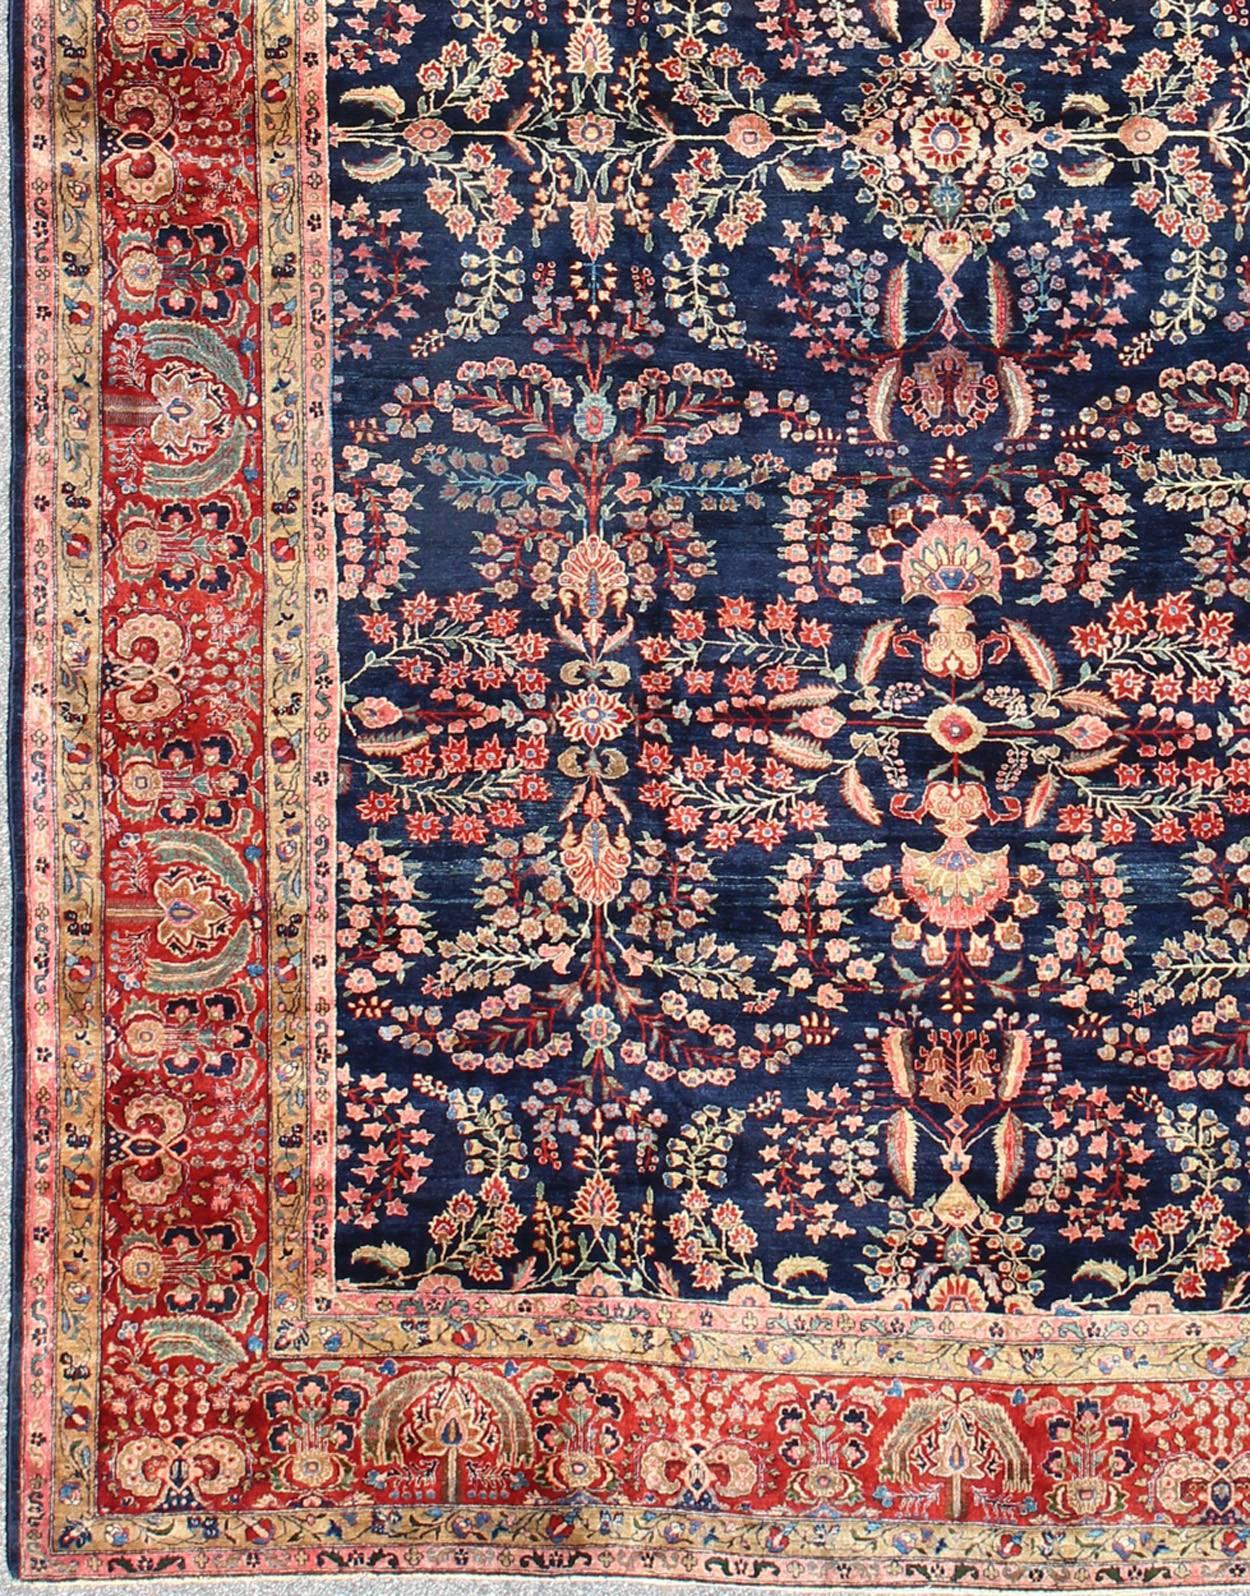 Antique Persian Sarouk Ferahan rug in blue background.
Antique Persian Finely Woven Sarouk Ferahan rug with intricate details in navy blue background and red border. rug / D-0921
This finely woven antique Persian Sarouk Feraghan carpet is rich in